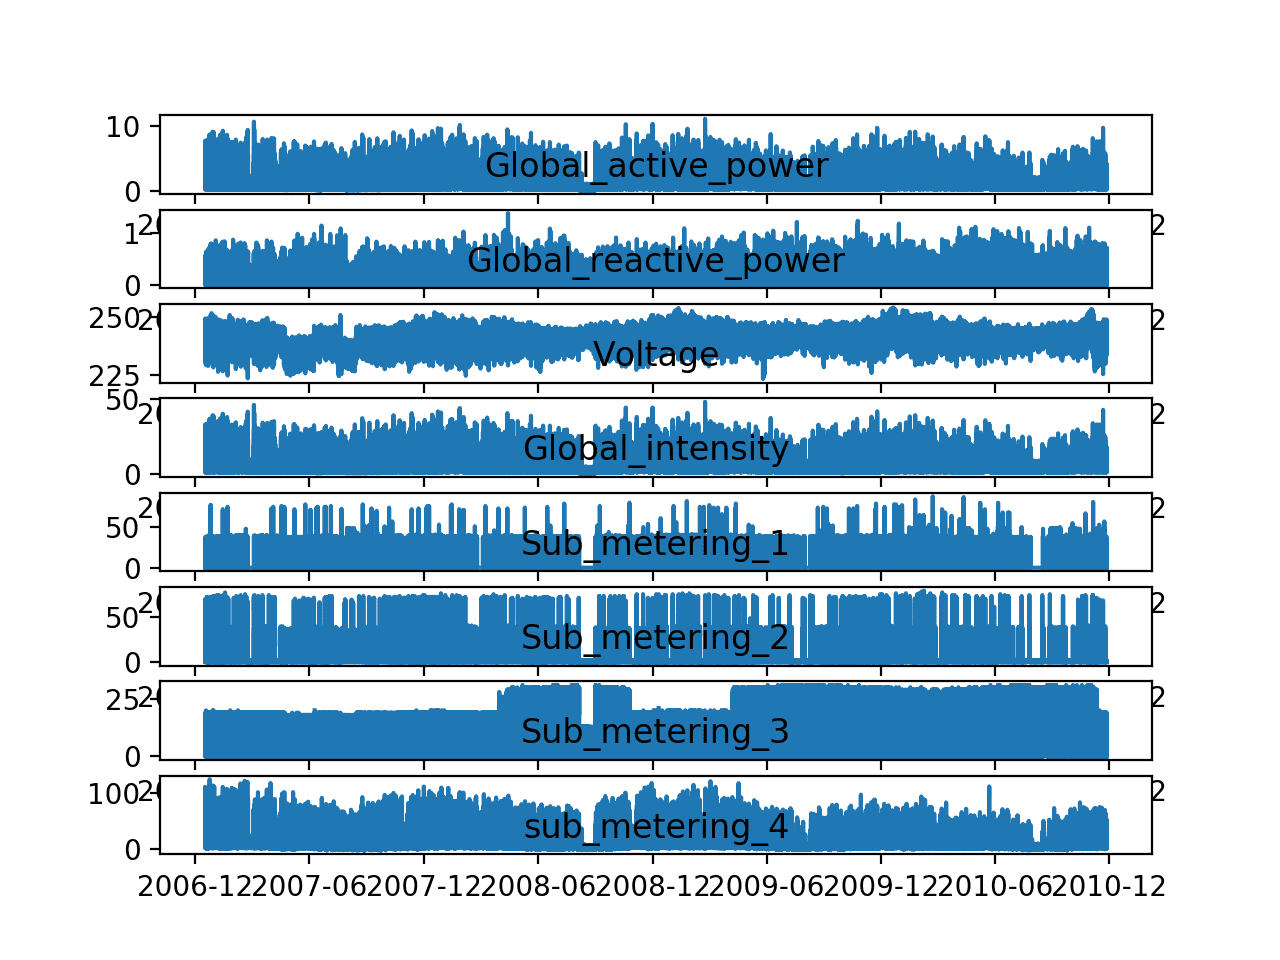 Line Plots of Each Variable in the Power Consumption Dataset